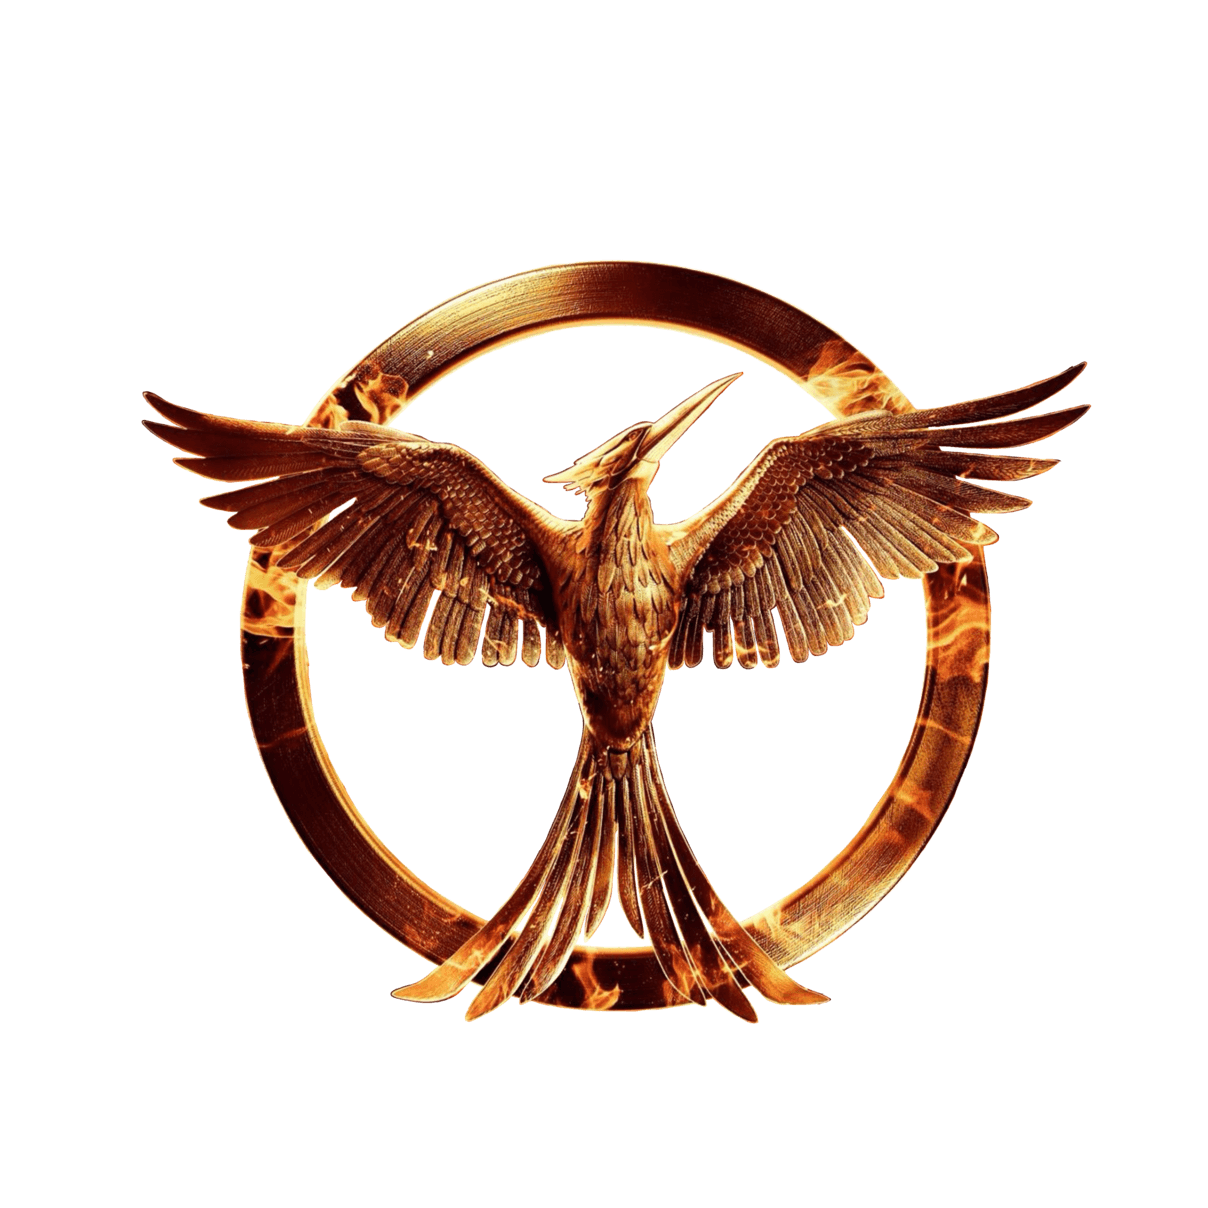 The Hunger Games PNG HD and HQ Image pngteam.com